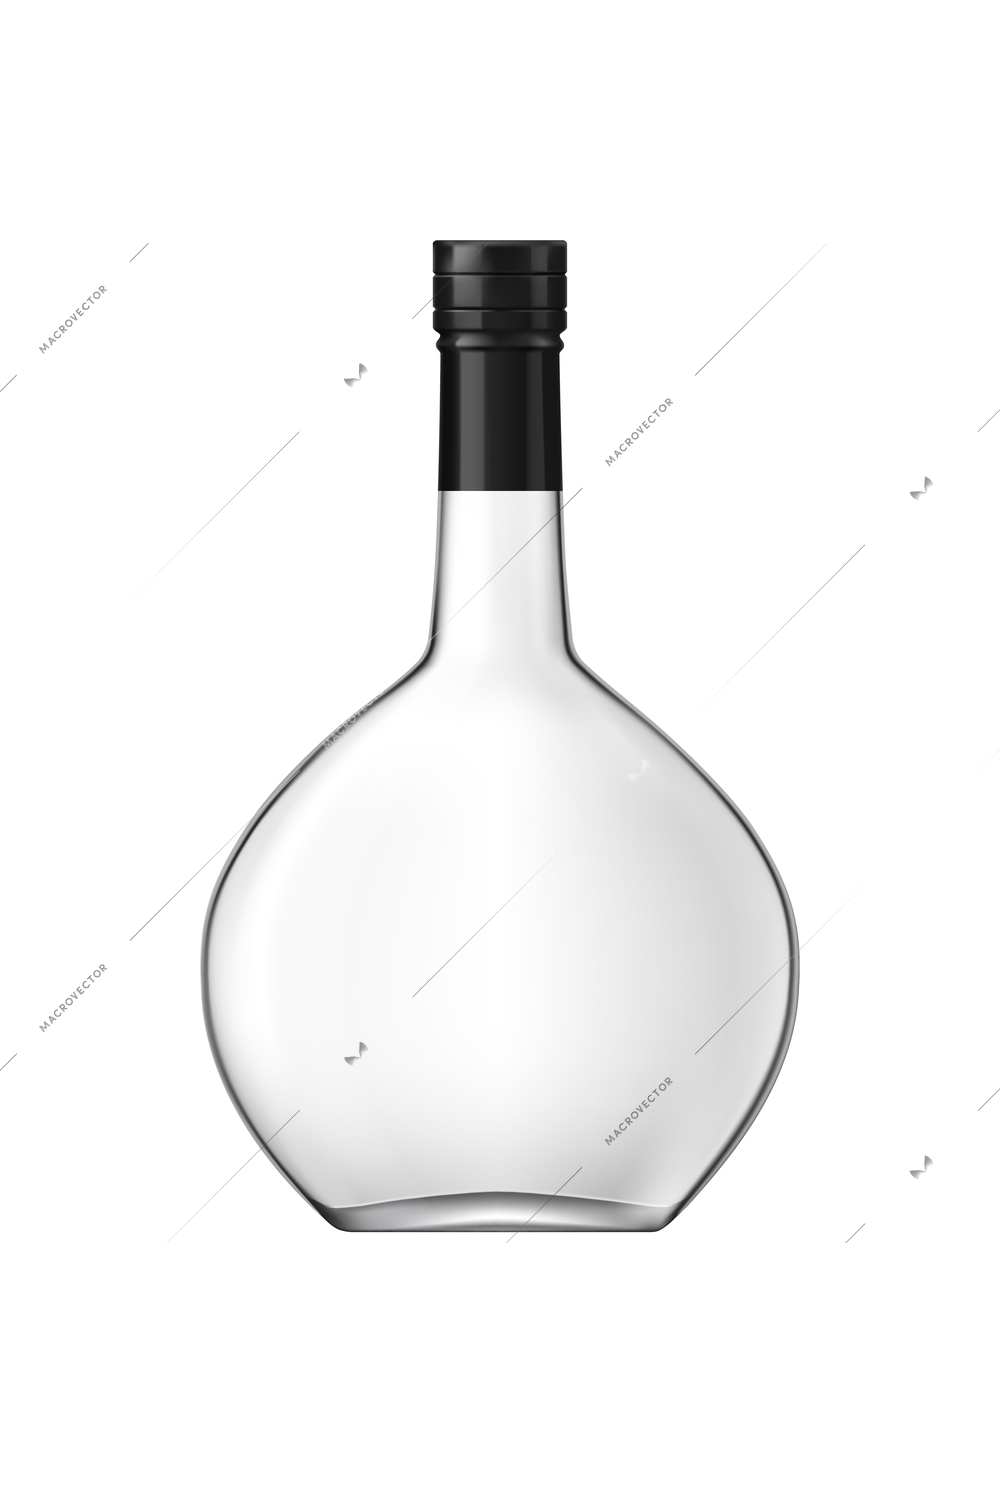 Brandy cognac whiskey glass bottles set with empty alcohol jars of different shape on transparent background vector illustration